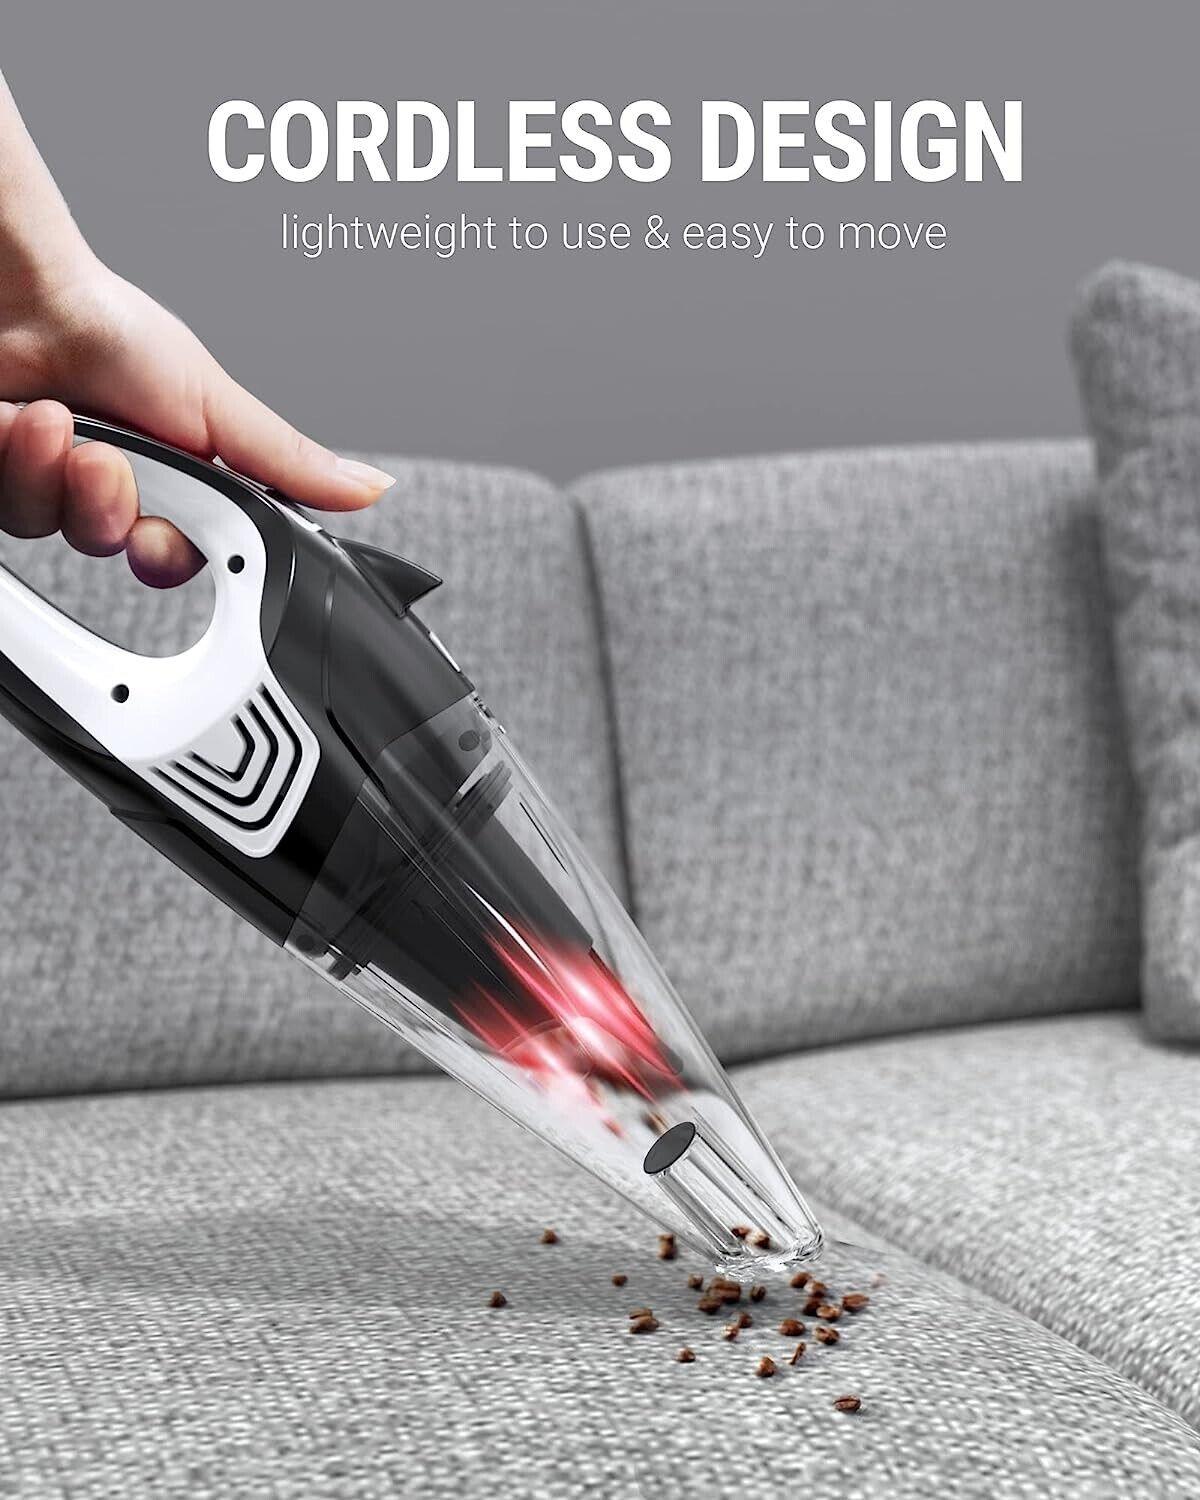 VacLife Handheld Vacuum, Car Cleaner Cordless with Power Suction, HEPA Filter - Massive Discounts